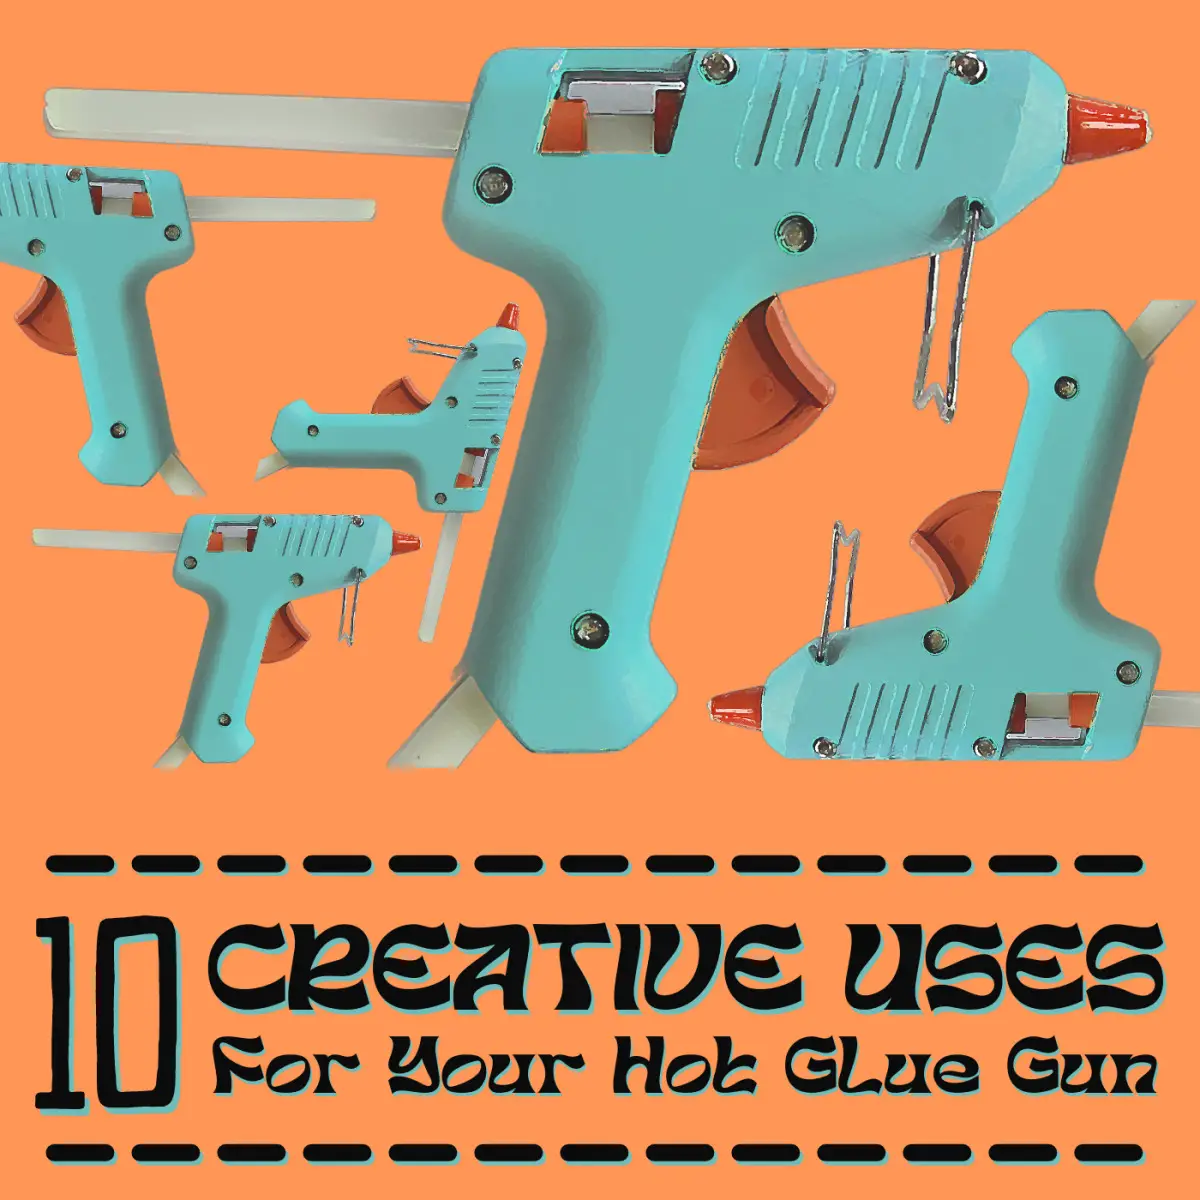 What To Do With A Glue Gun